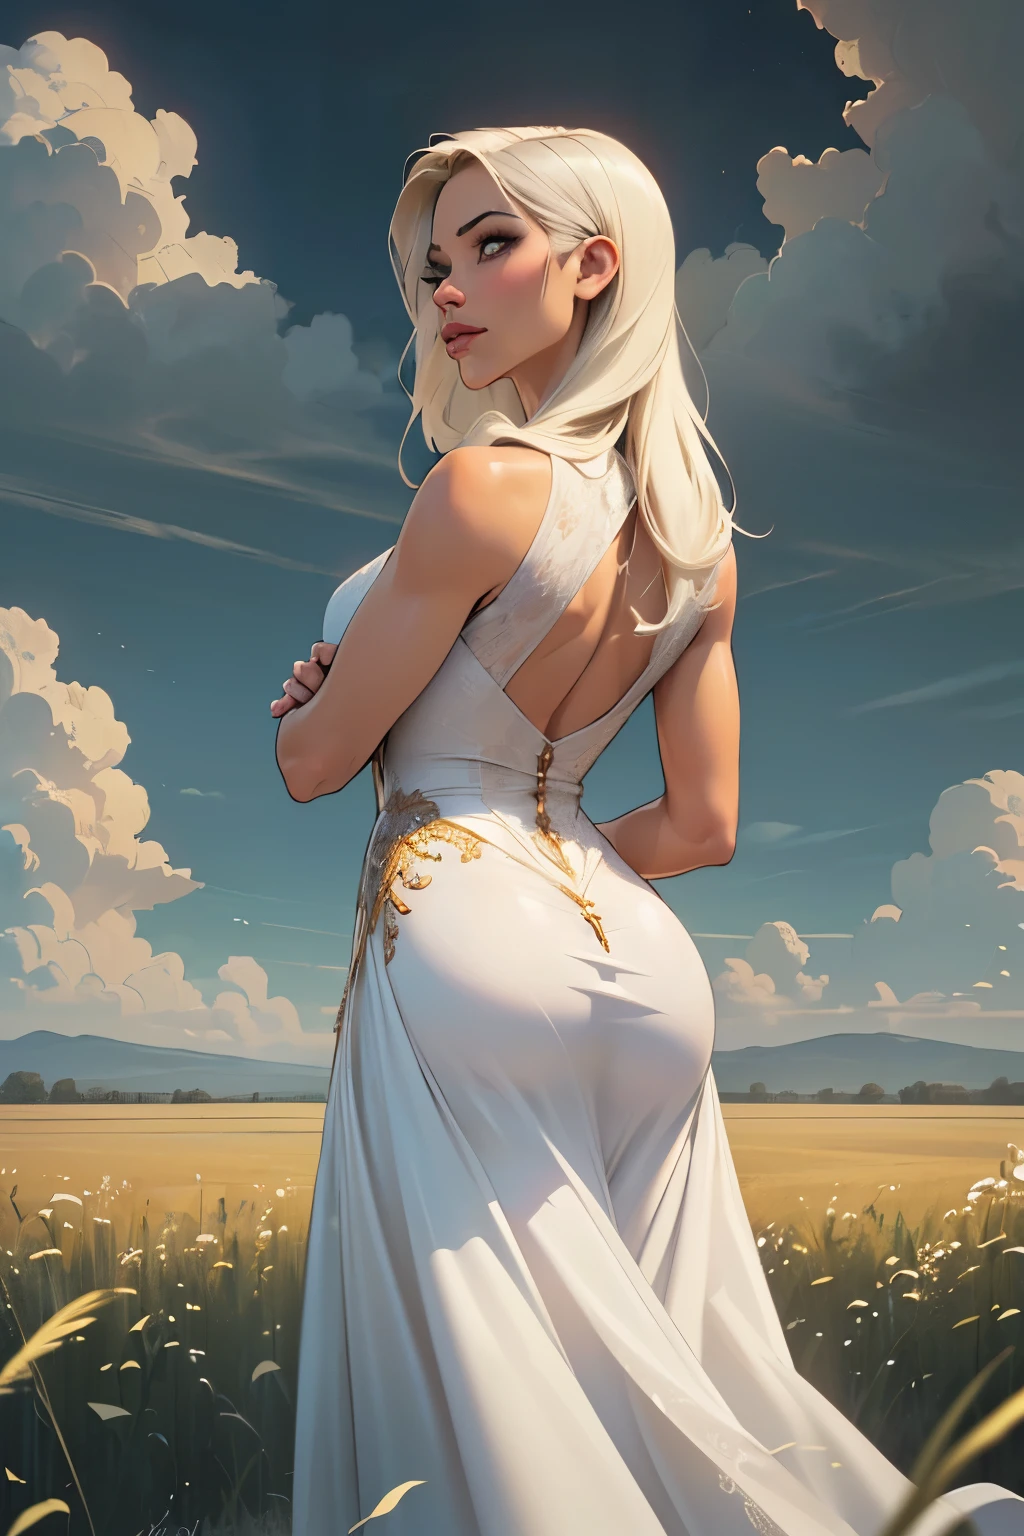 ((Dramatic pose:1.3)), turning around, radiant aura, (best quality,8k,ultra-detailed:1.2),(pale,glowing skin),(cinematic lighting:1.1),(dark,dim),(long flowing white hair),(beautiful intricate face,detailed features),(golden white dress:silky),(intense gaze),(viewing audience),(unbelievably detailed 8K CG wallpaper),(artistic cinematic lighting with neutral filter),((overcast clouds, fields background:1.4))